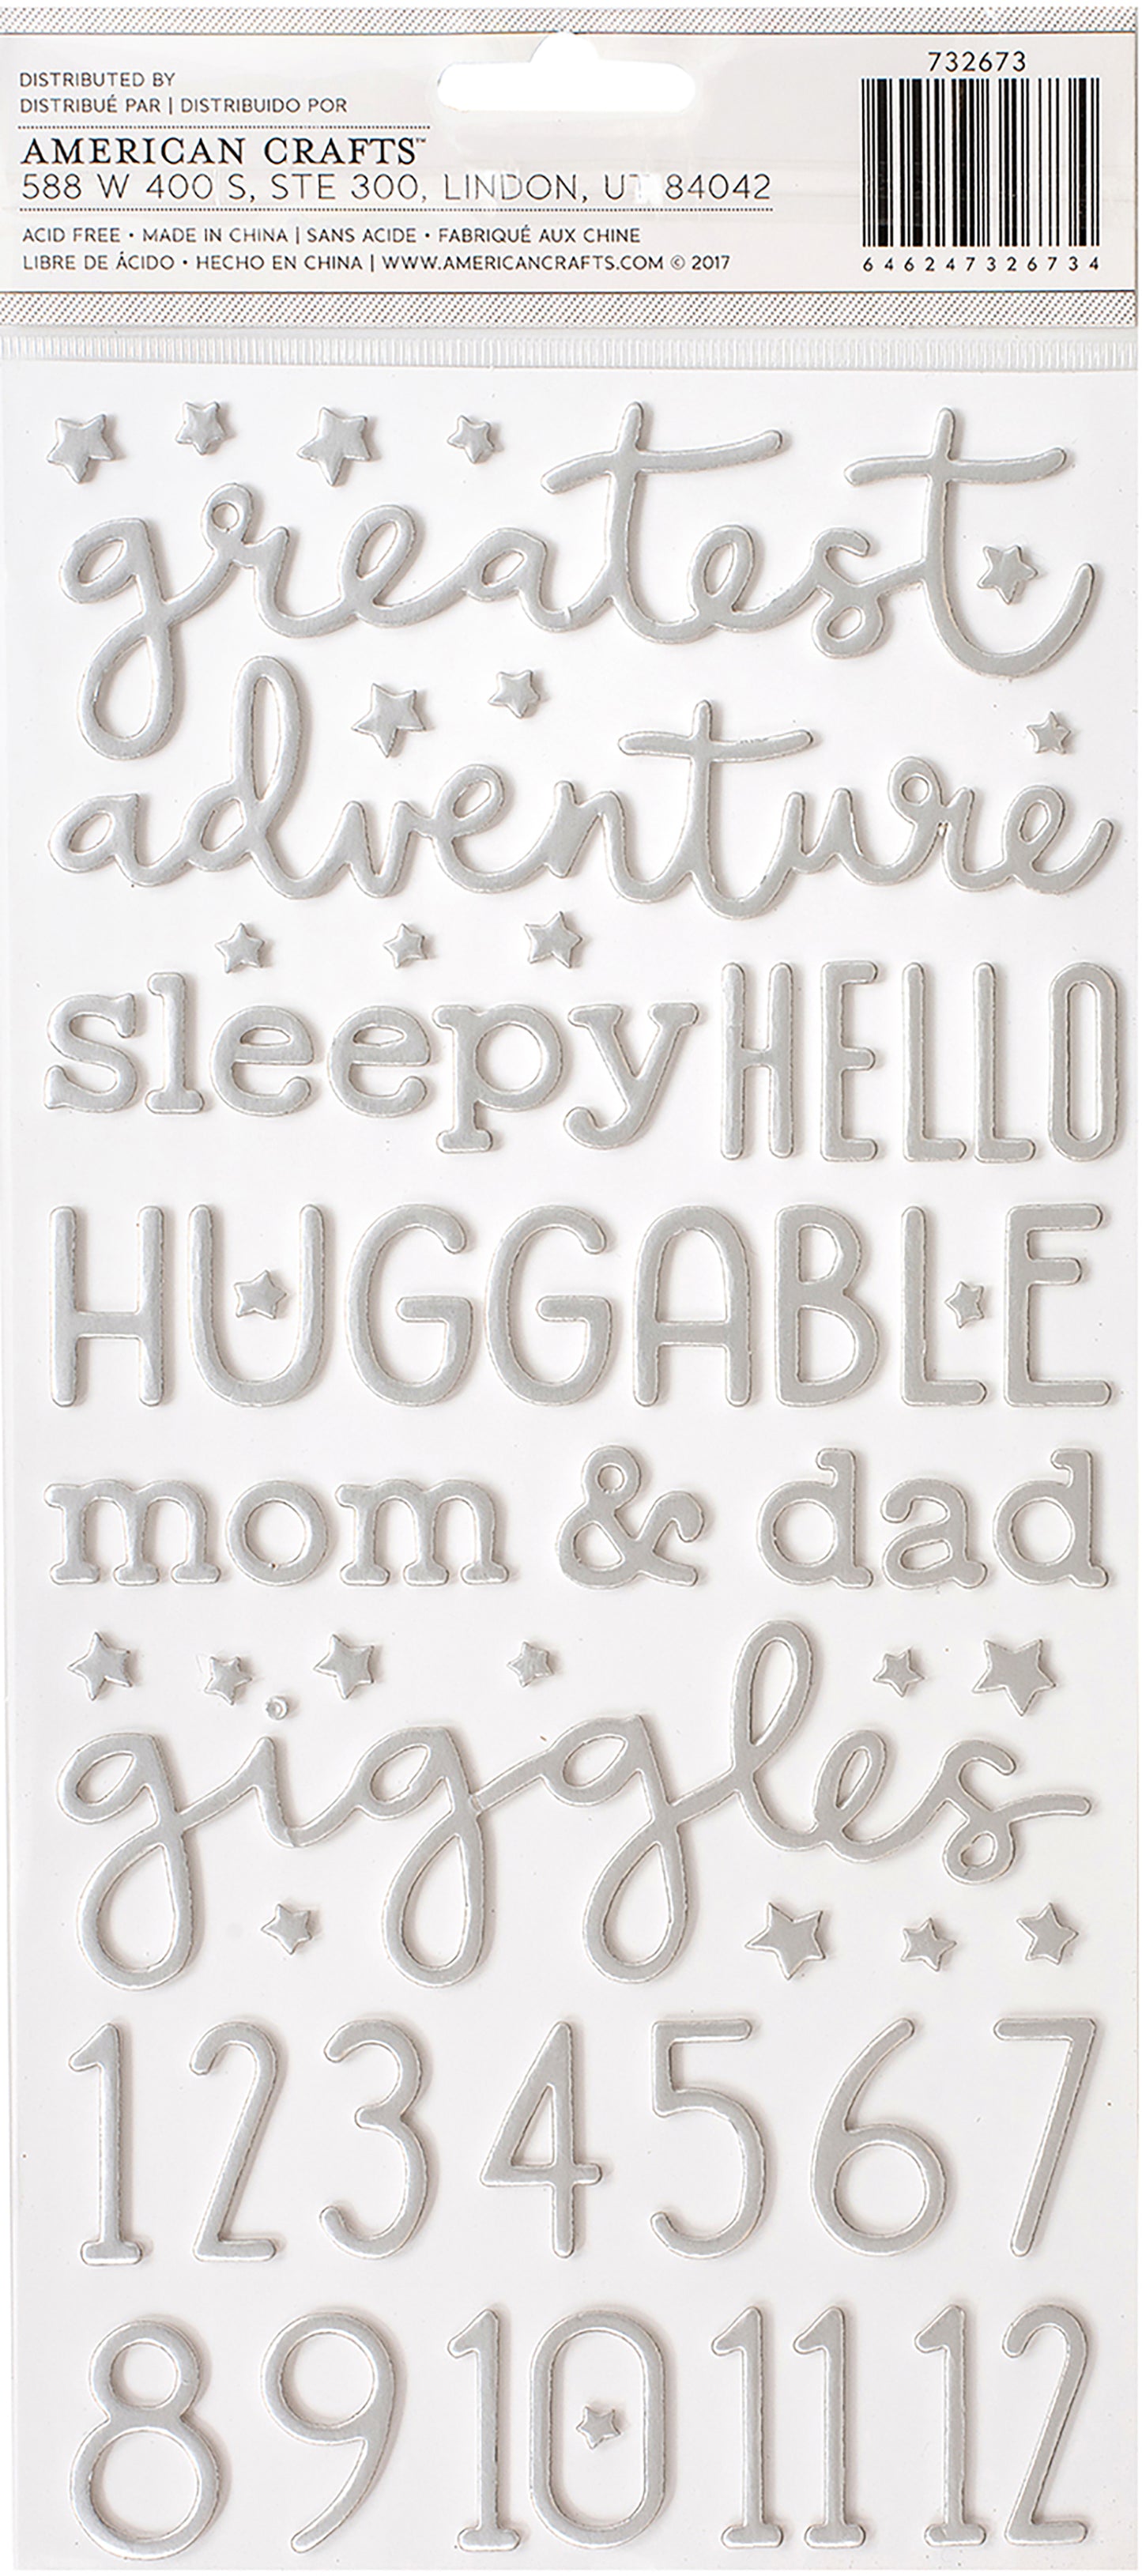 Night Night Baby Boy Thickers Stickers 5.5"X11" 158/Pkg-Words & Numbers/Silver Foiled Foam